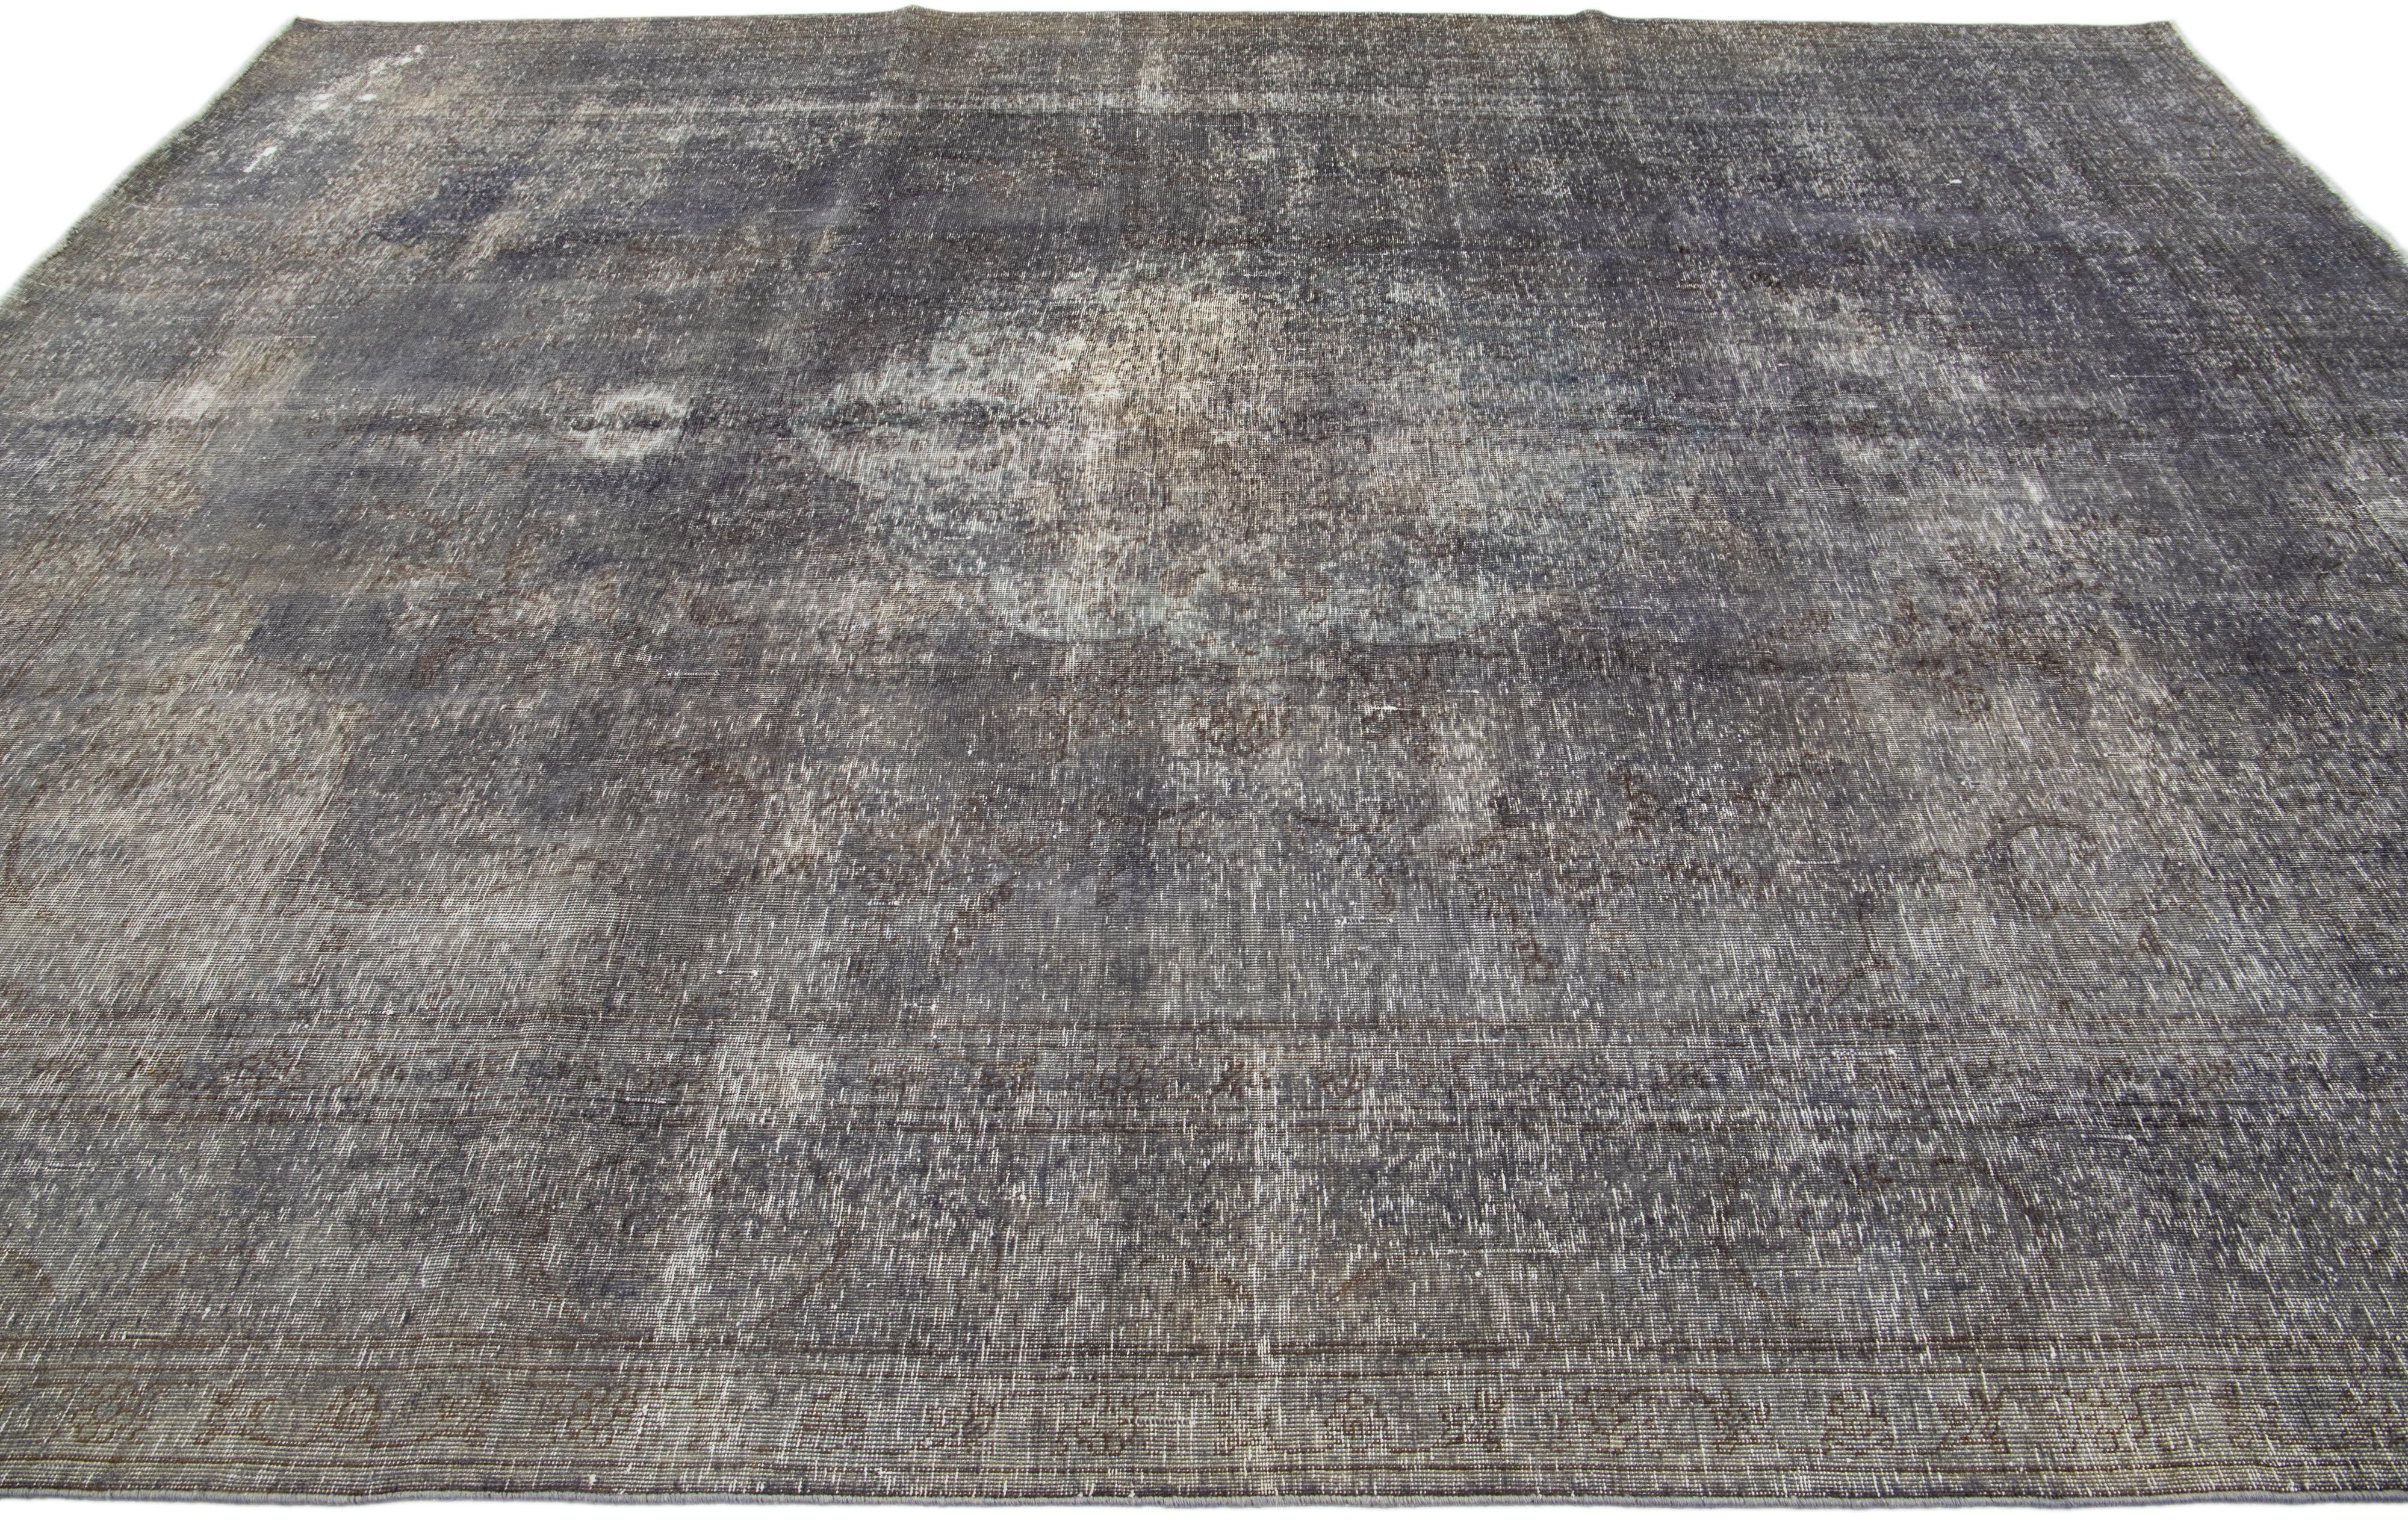 Persian Handmade 1960s Overdyed Wool Rug with Allover Design In gray For Sale